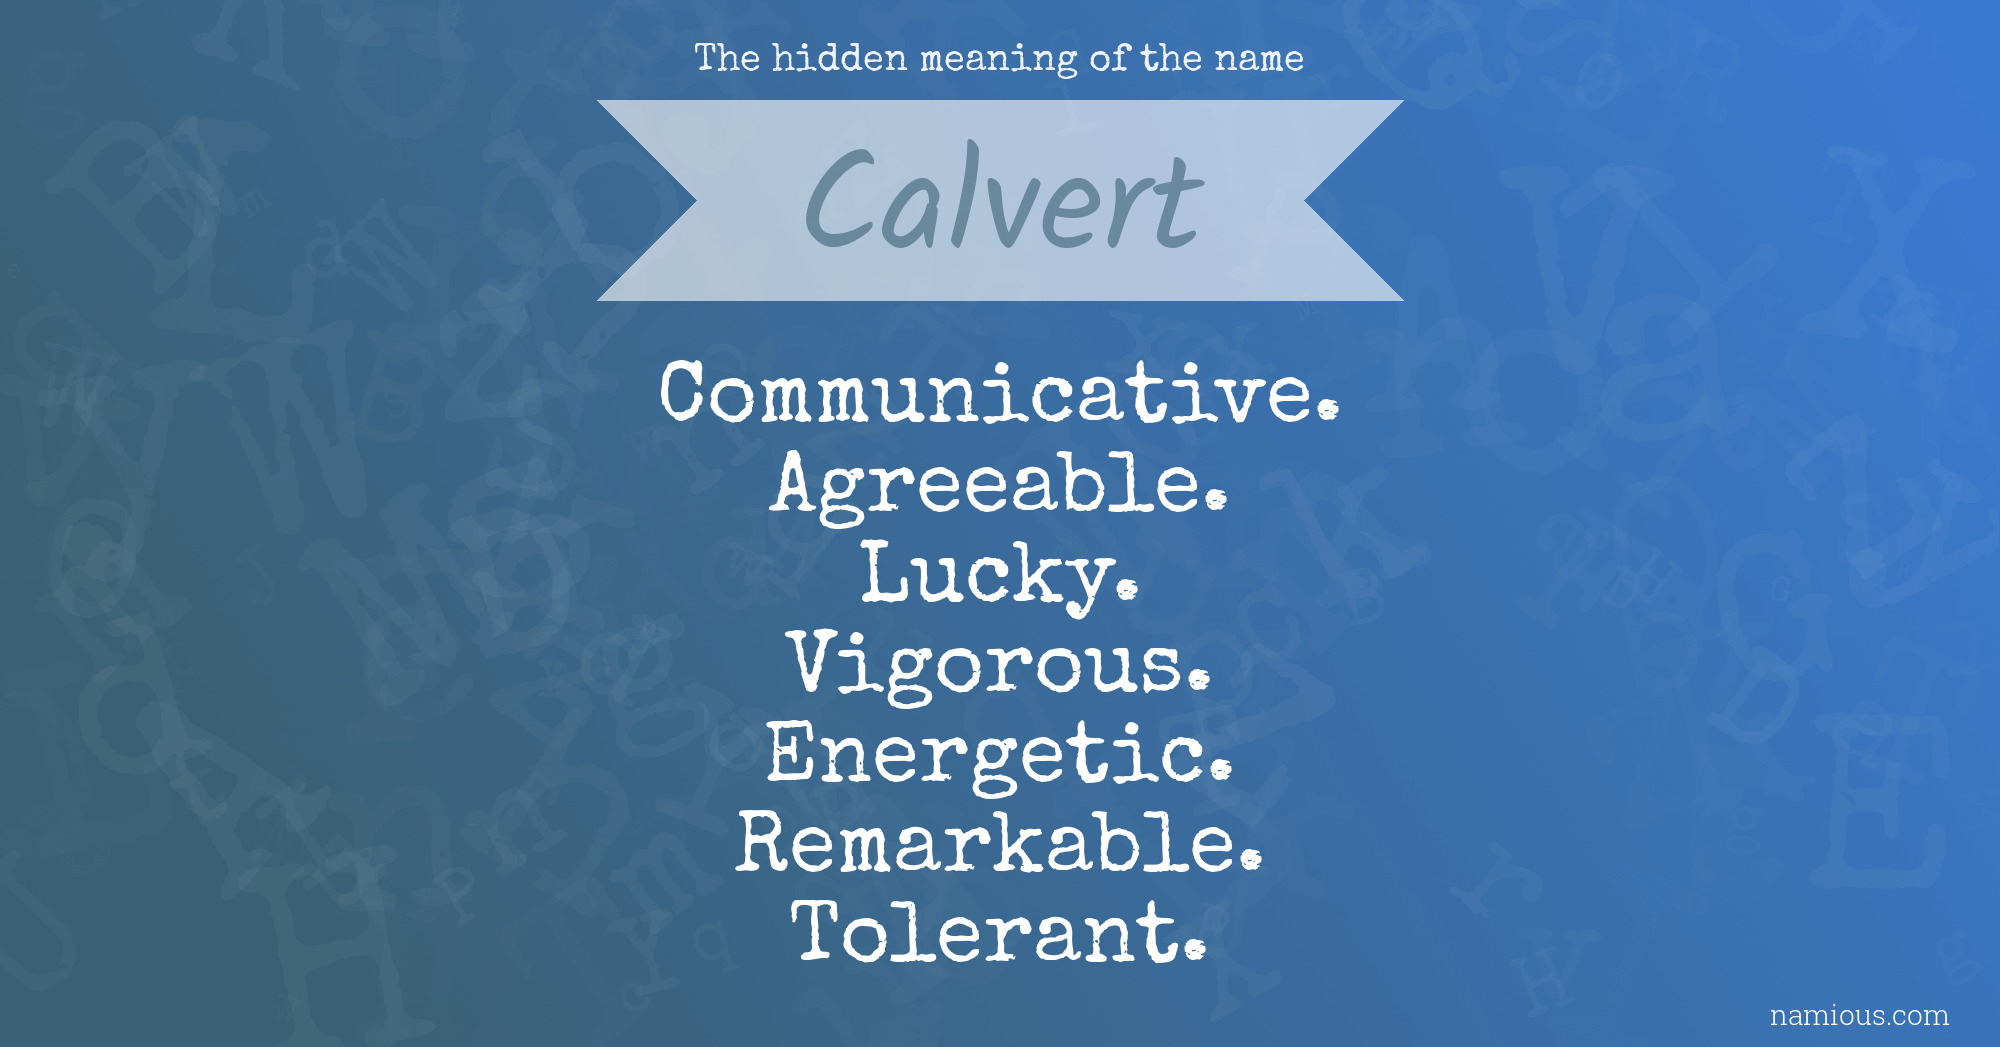 The hidden meaning of the name Calvert